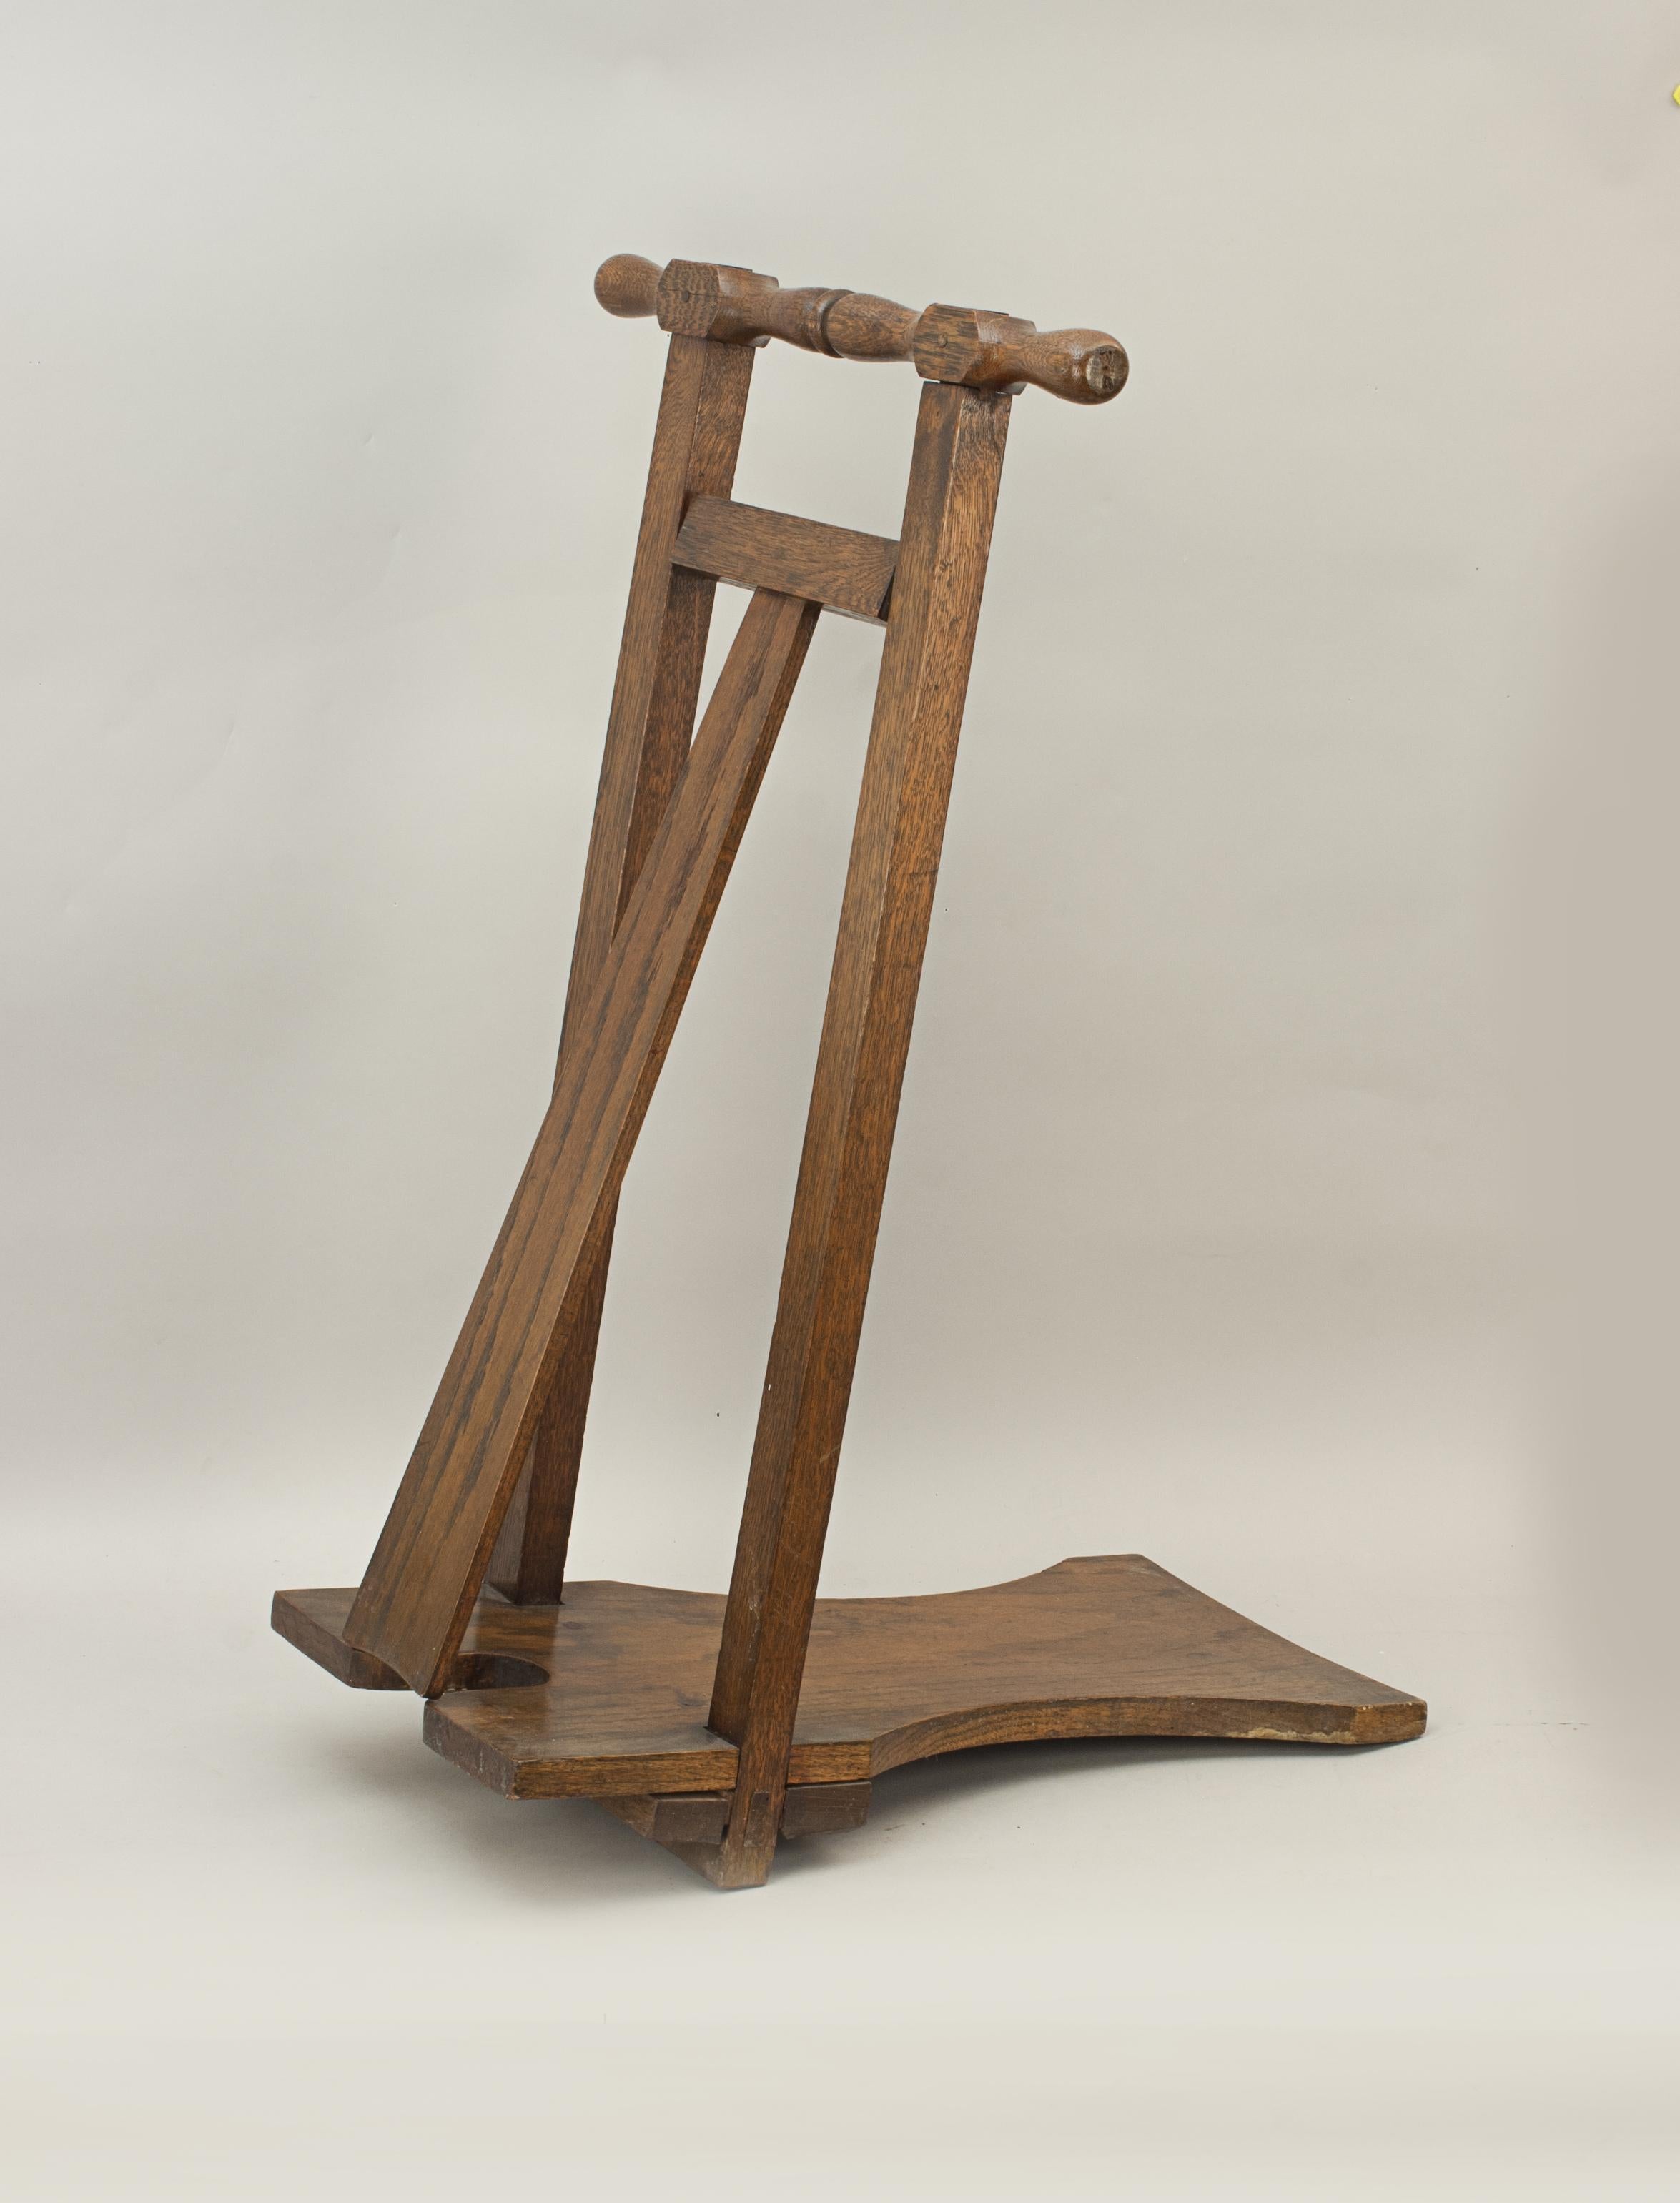 Antique oak boot jack.
A fine quality freestanding equestrian oak boot jack. Ideal for taking off Fox hunting or riding boots. The front frame being two square supports finished with a turned T-handle on top. The foot plate is shaped to take the